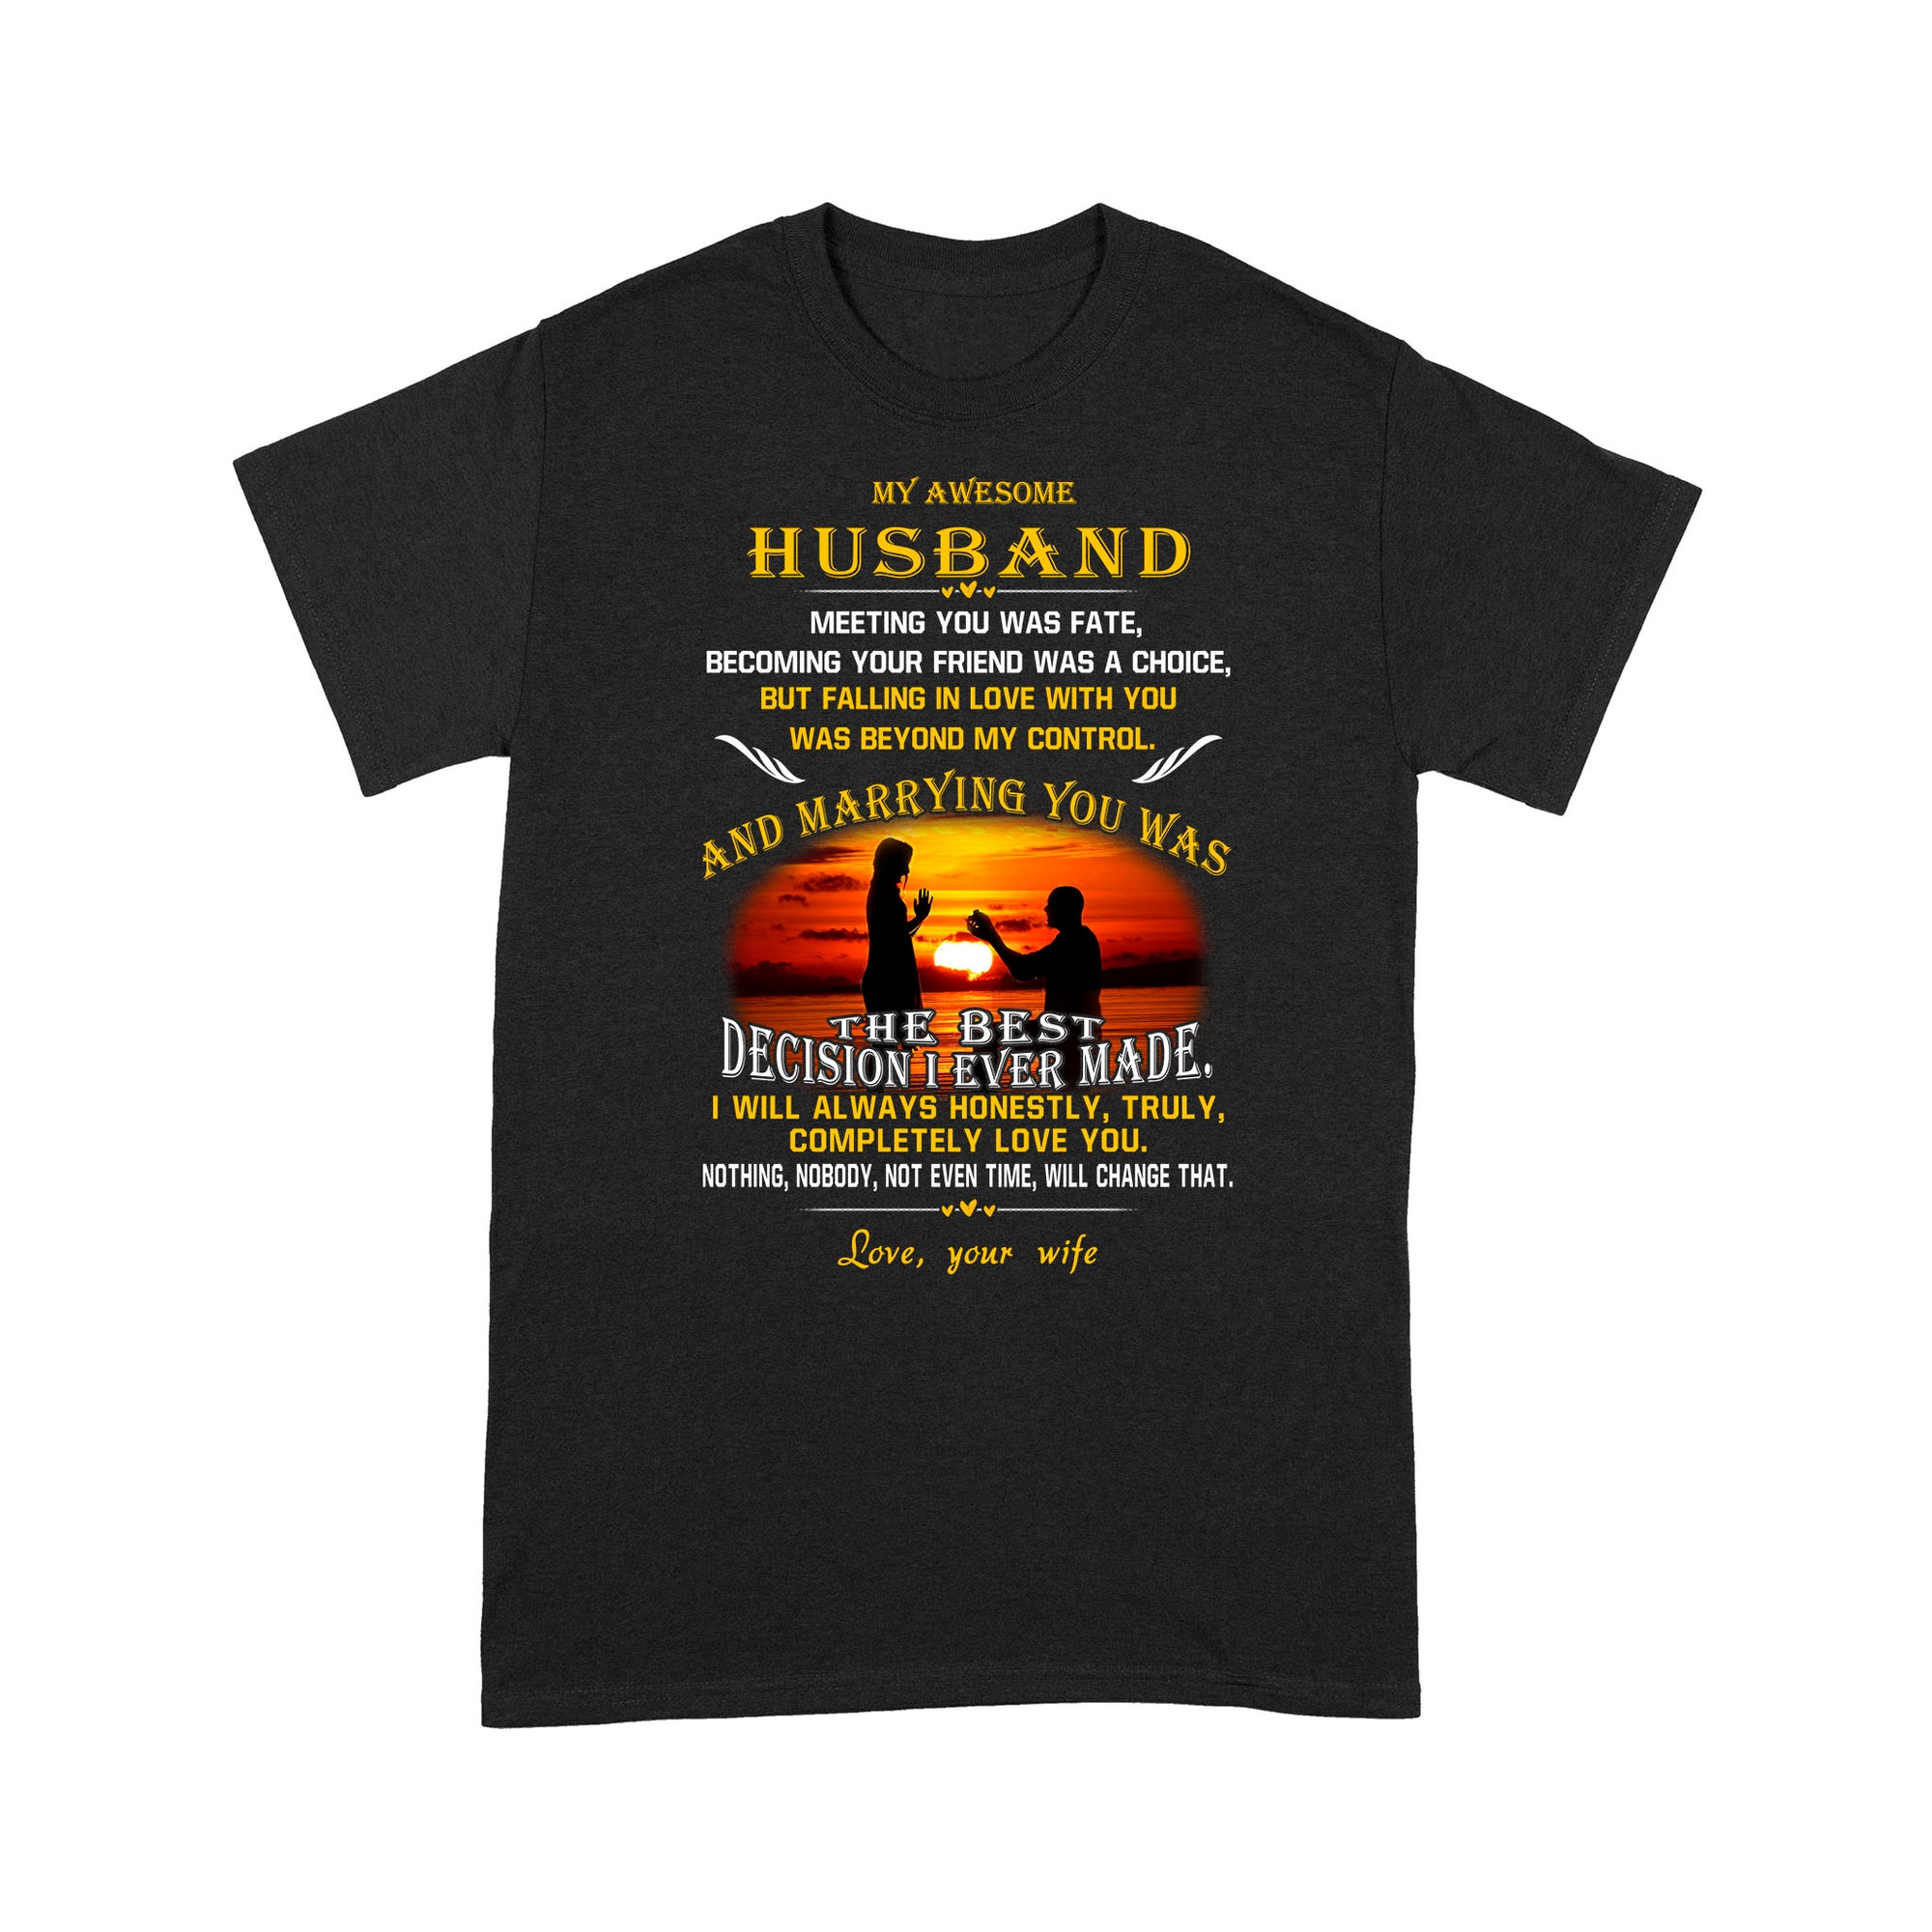 My Awesome Husband Meeting You Was Fate Becoming Your Friend Was A Choice - Premium T-shirt